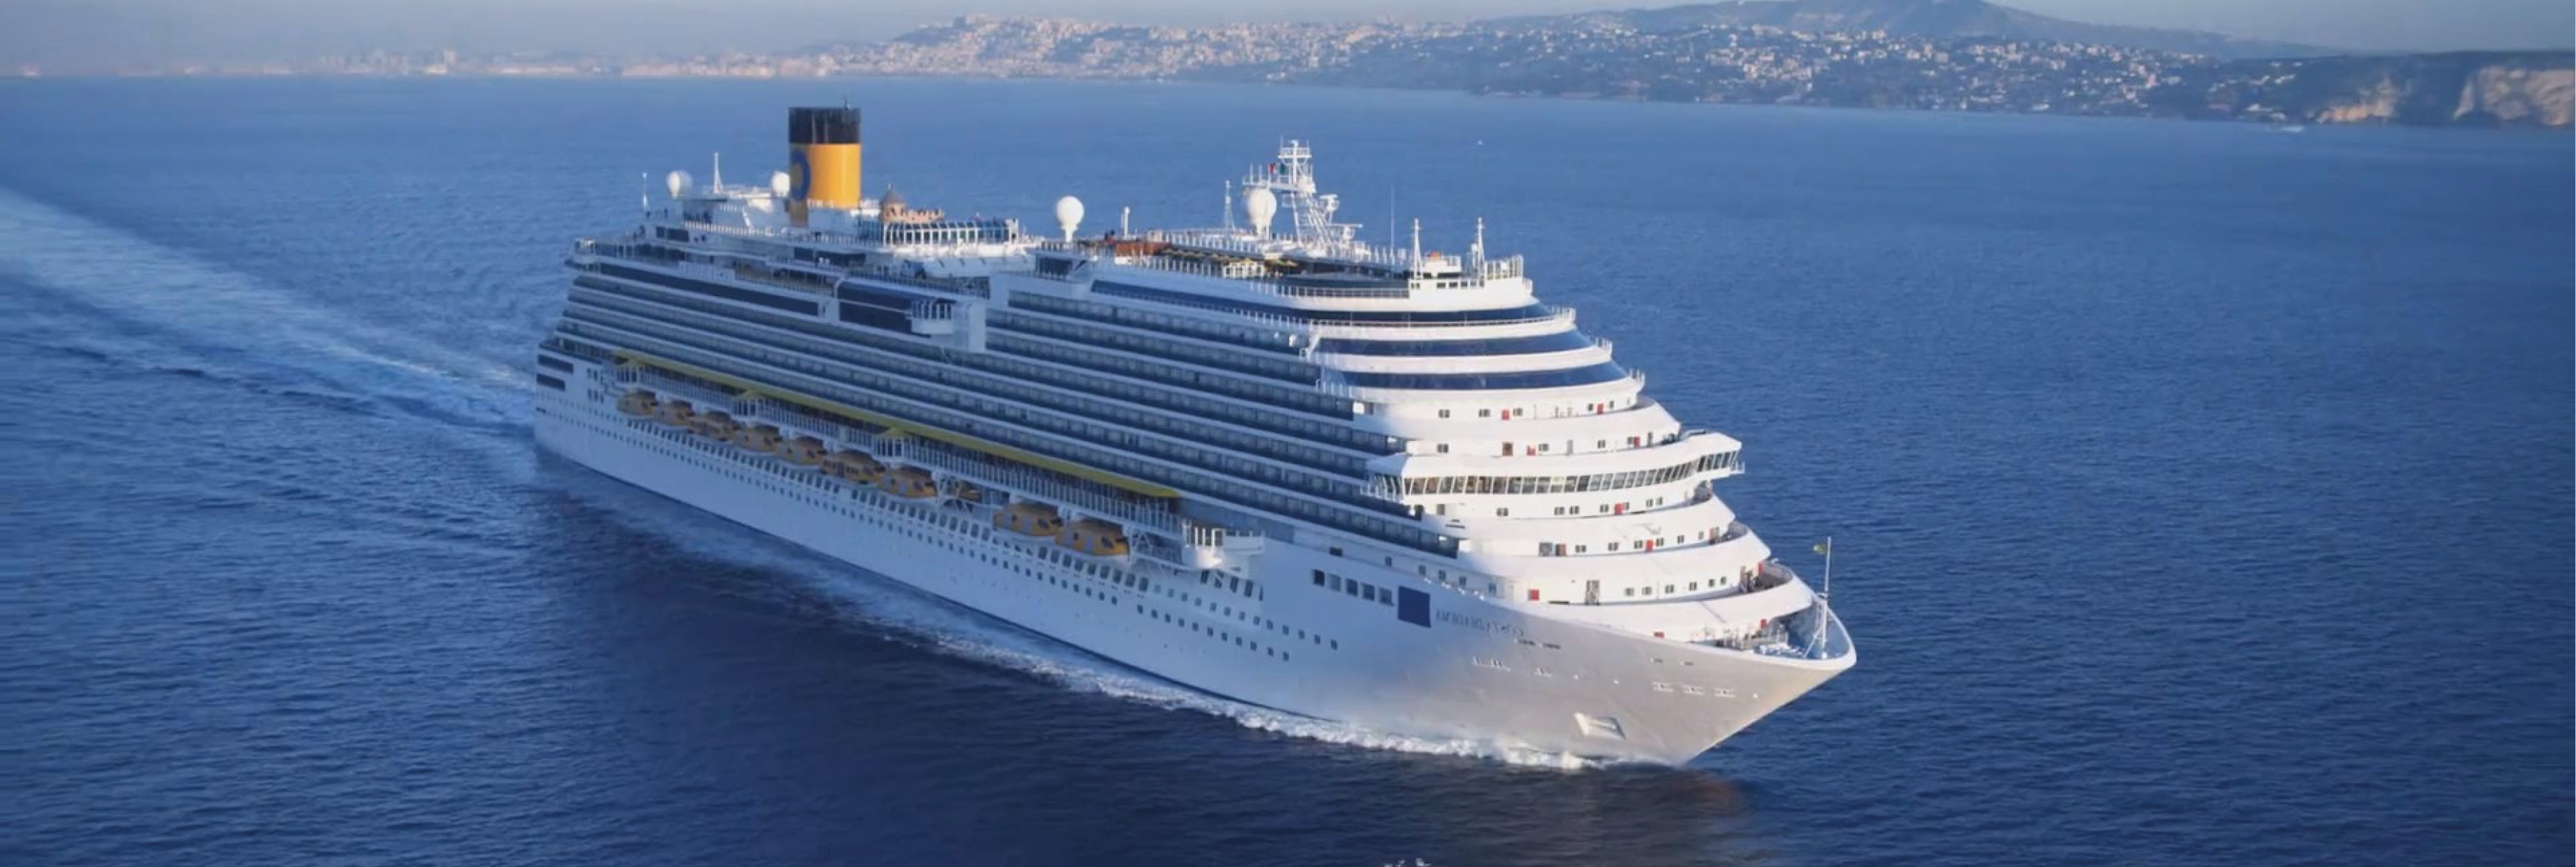 Costa Cruise official blog image